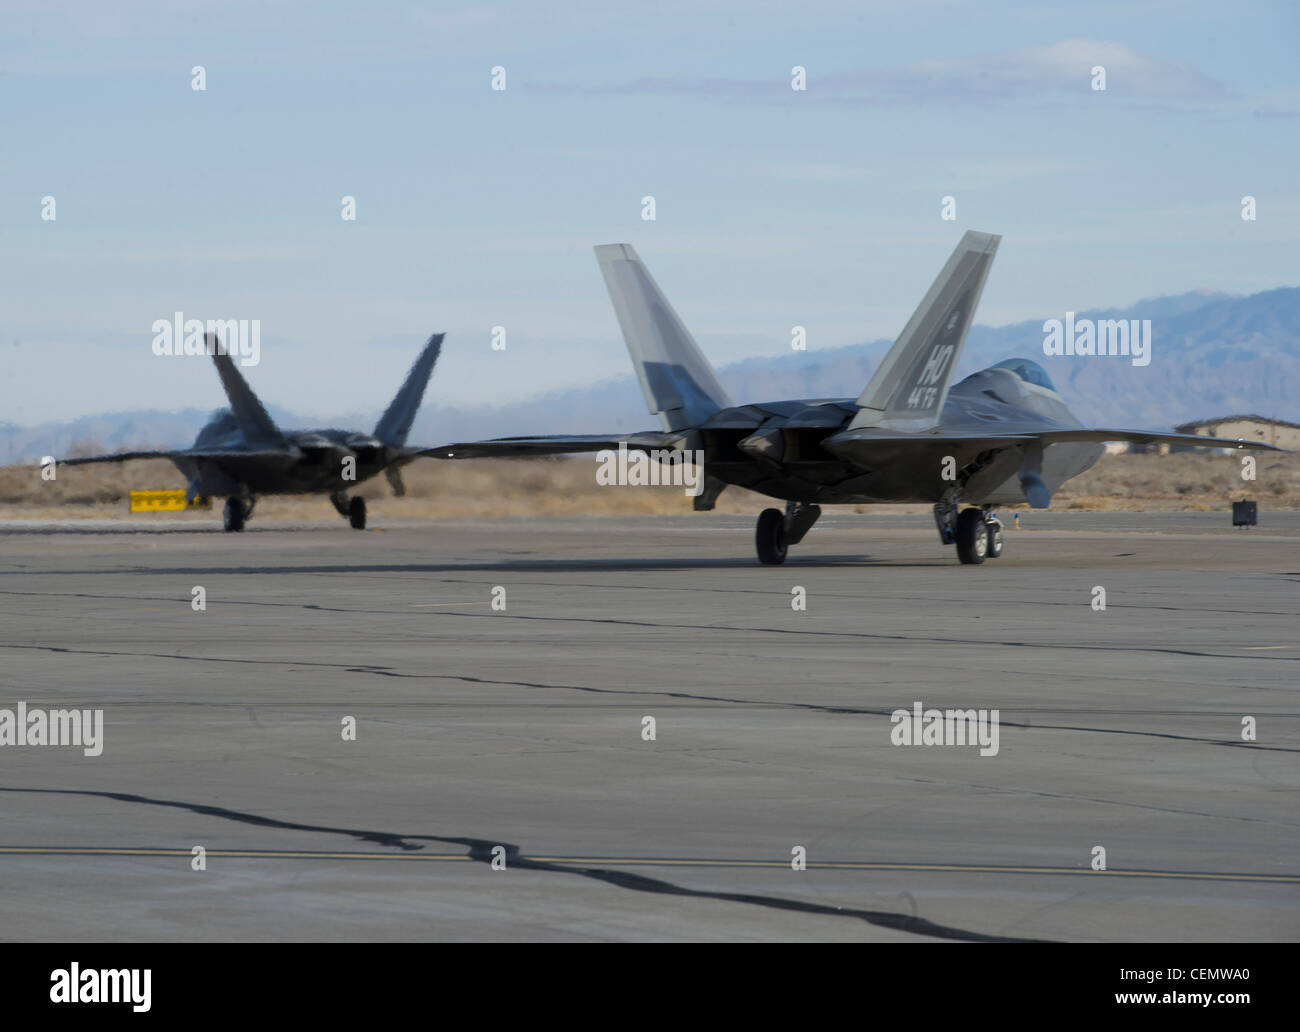 HOLLOMAN AIR FORCE BASE, N.M. -- Two F-22 Raptors taxi to the runway Feb. 16, after successfully getting through the end of runway final checks. Eight F-22s were launched as Holloman’s premiere aircraft took to the sky to continue training to maintain combat mission readiness. Stock Photo